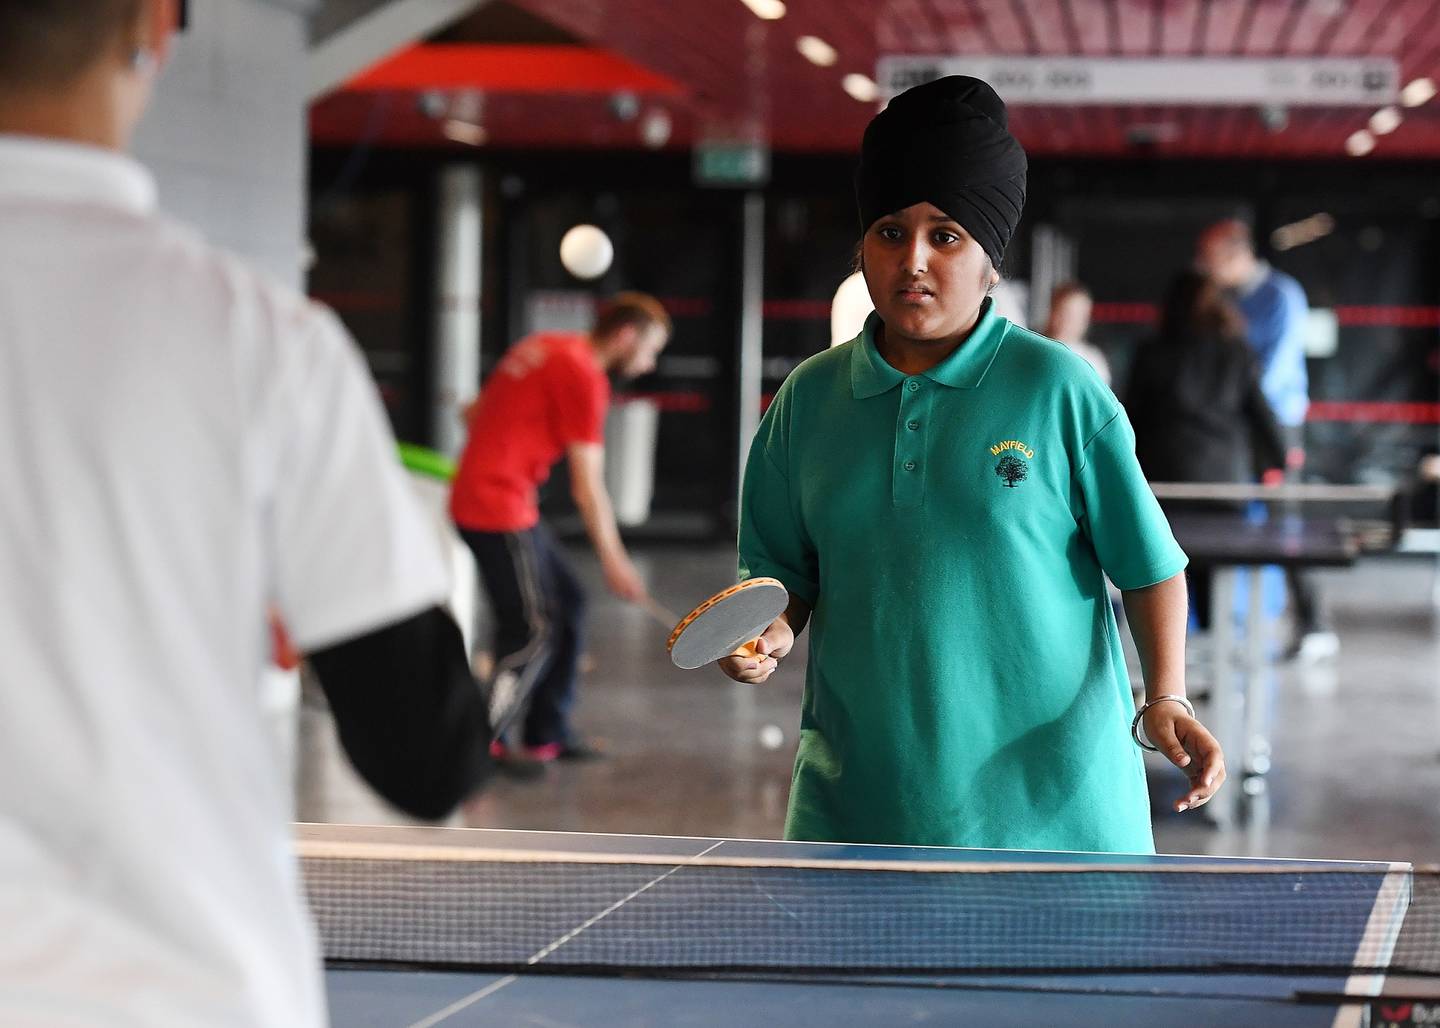 Boy plays table tennis at school event